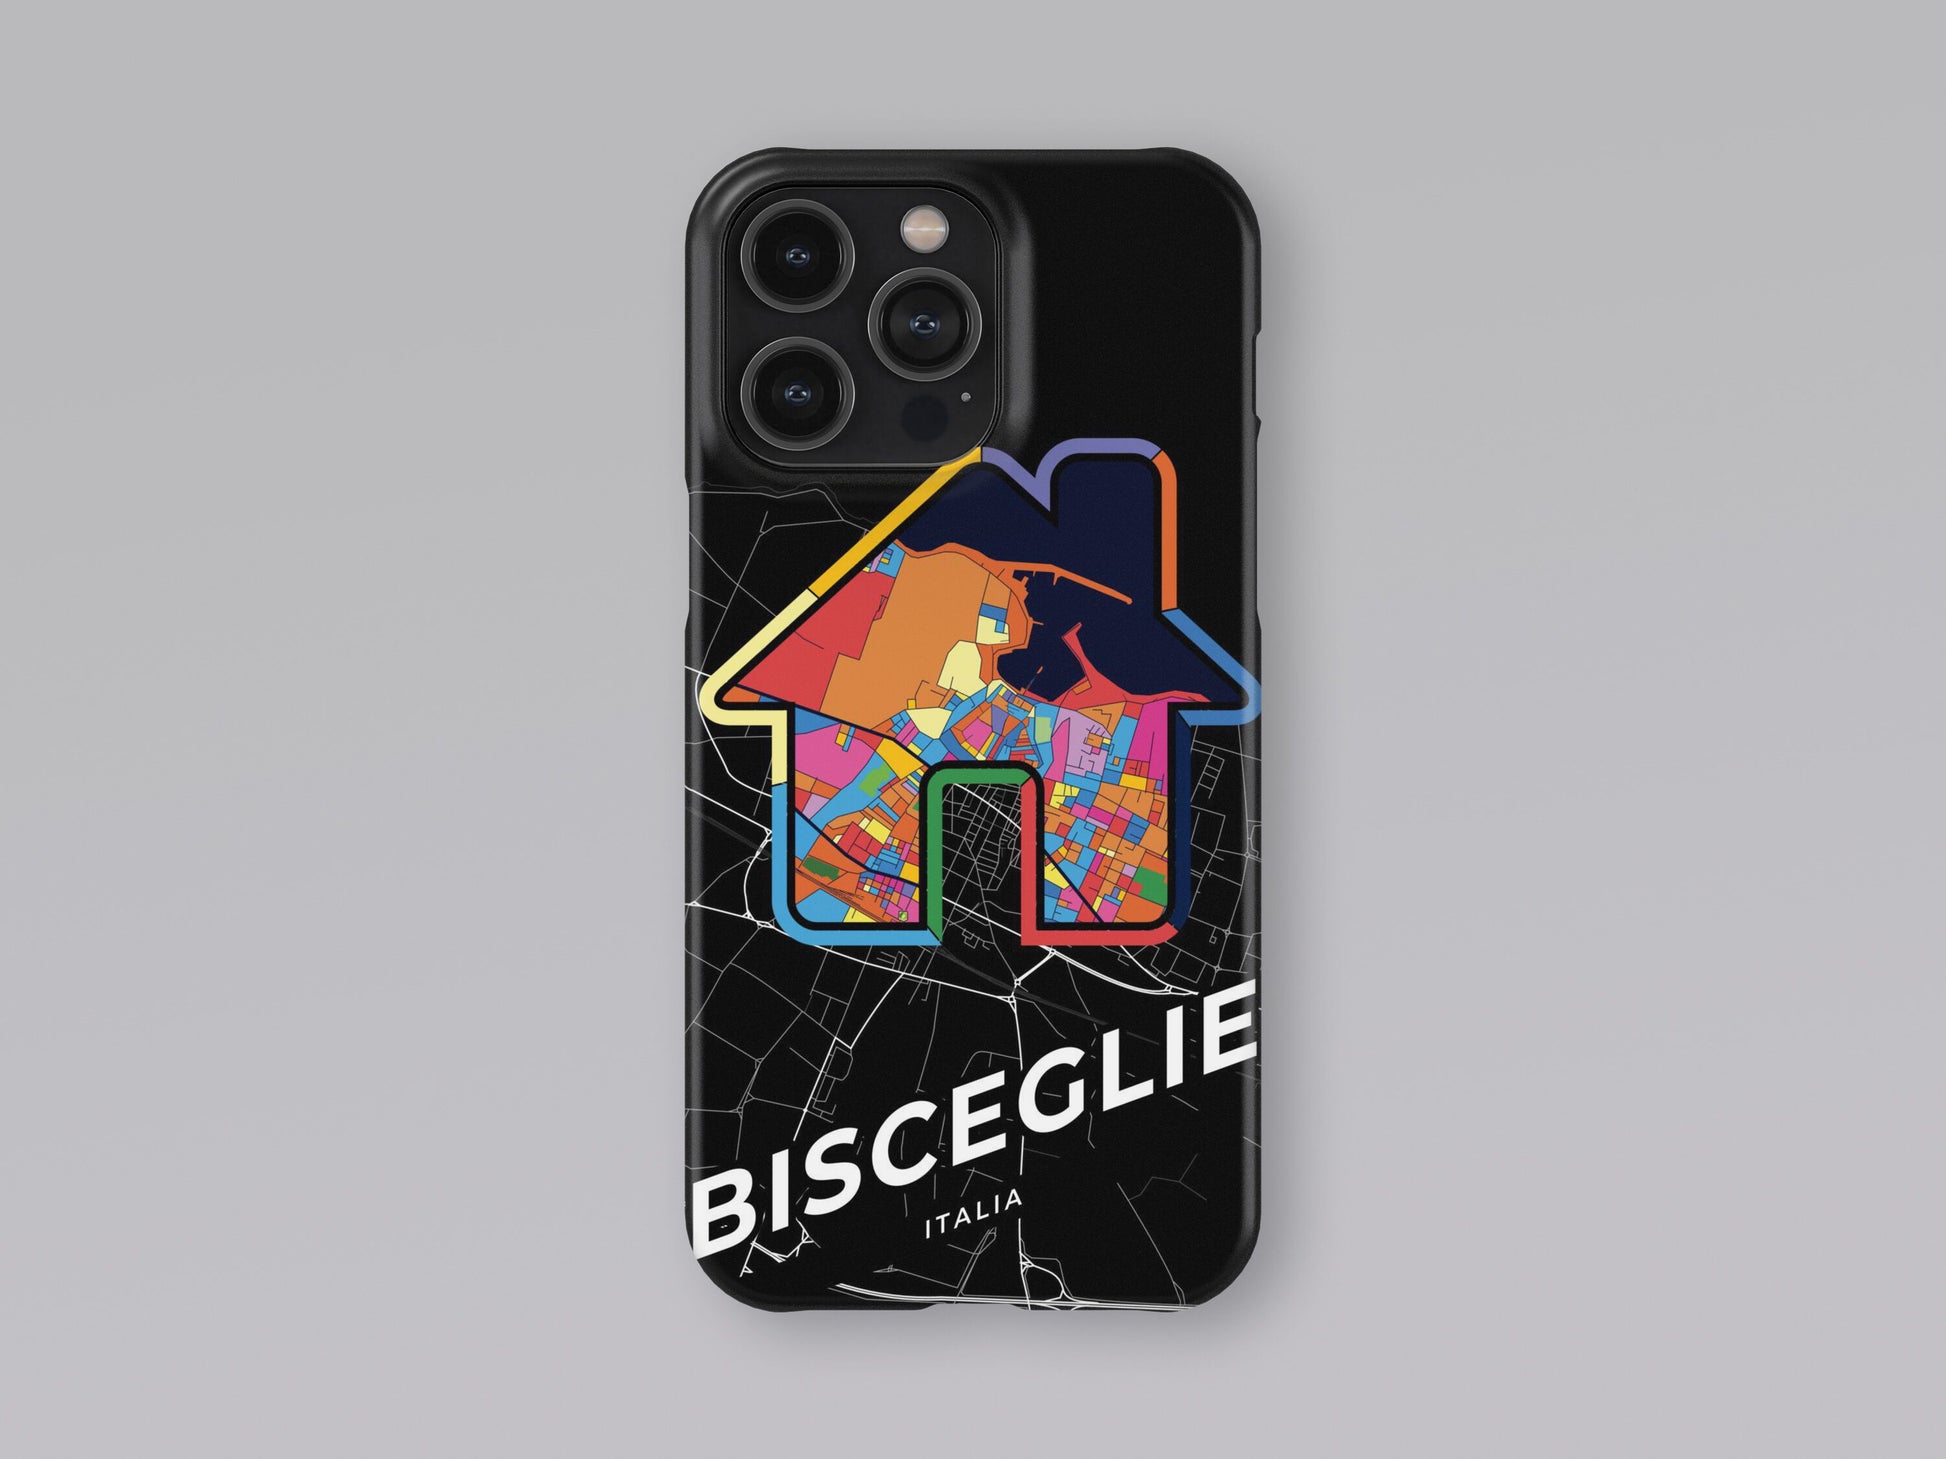 Bisceglie Italy slim phone case with colorful icon. Birthday, wedding or housewarming gift. Couple match cases. 3